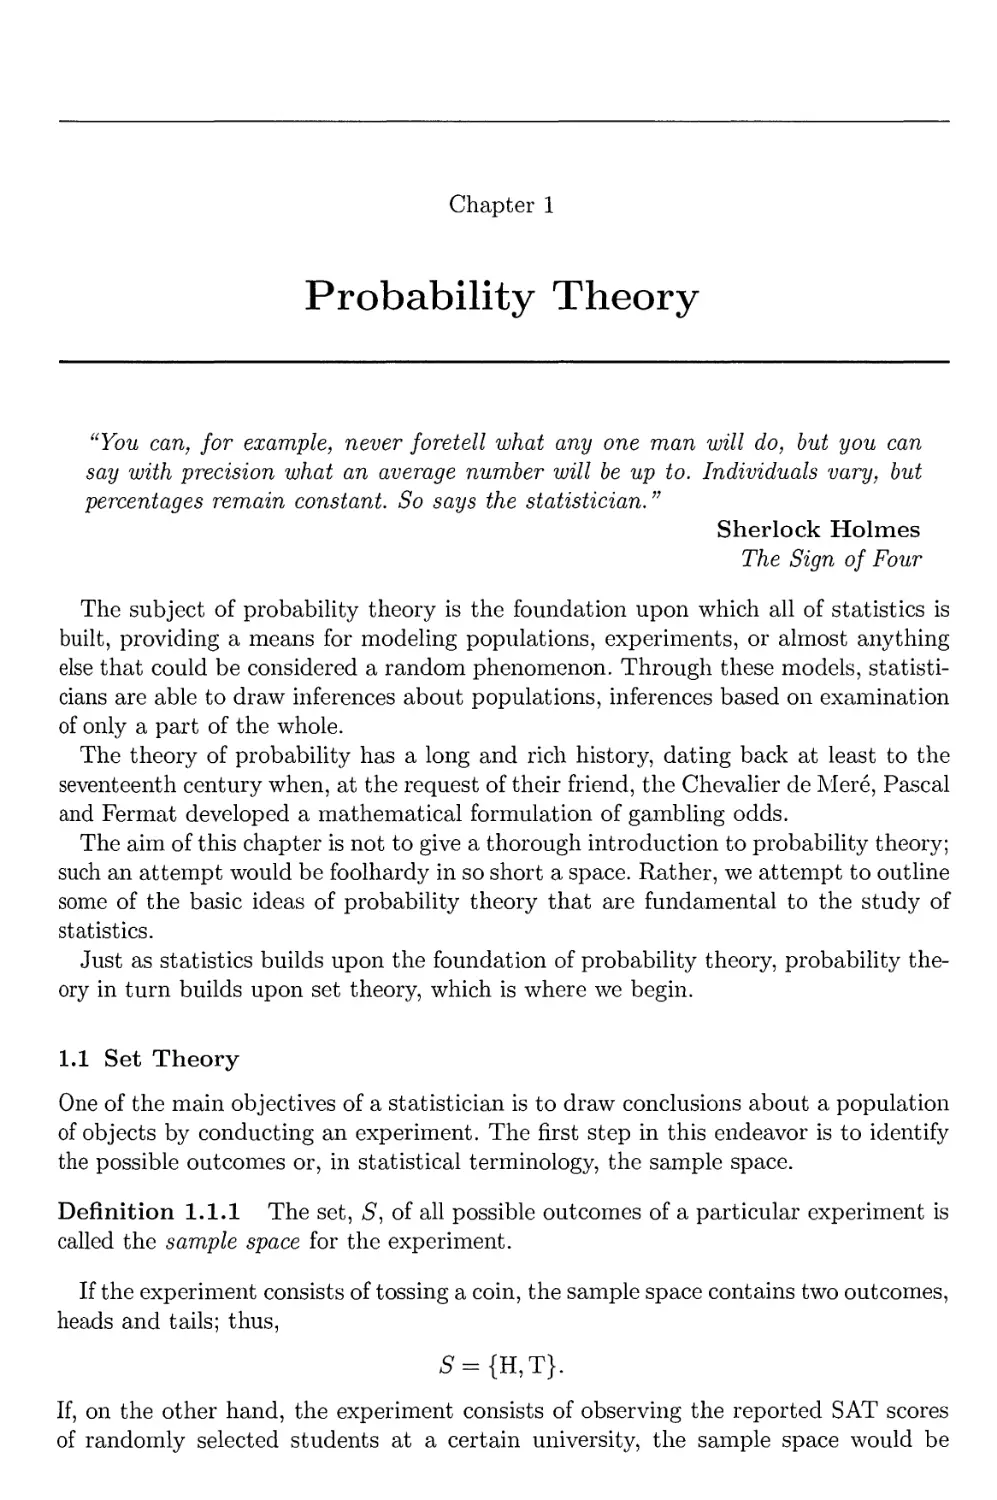 1. Probability Theory